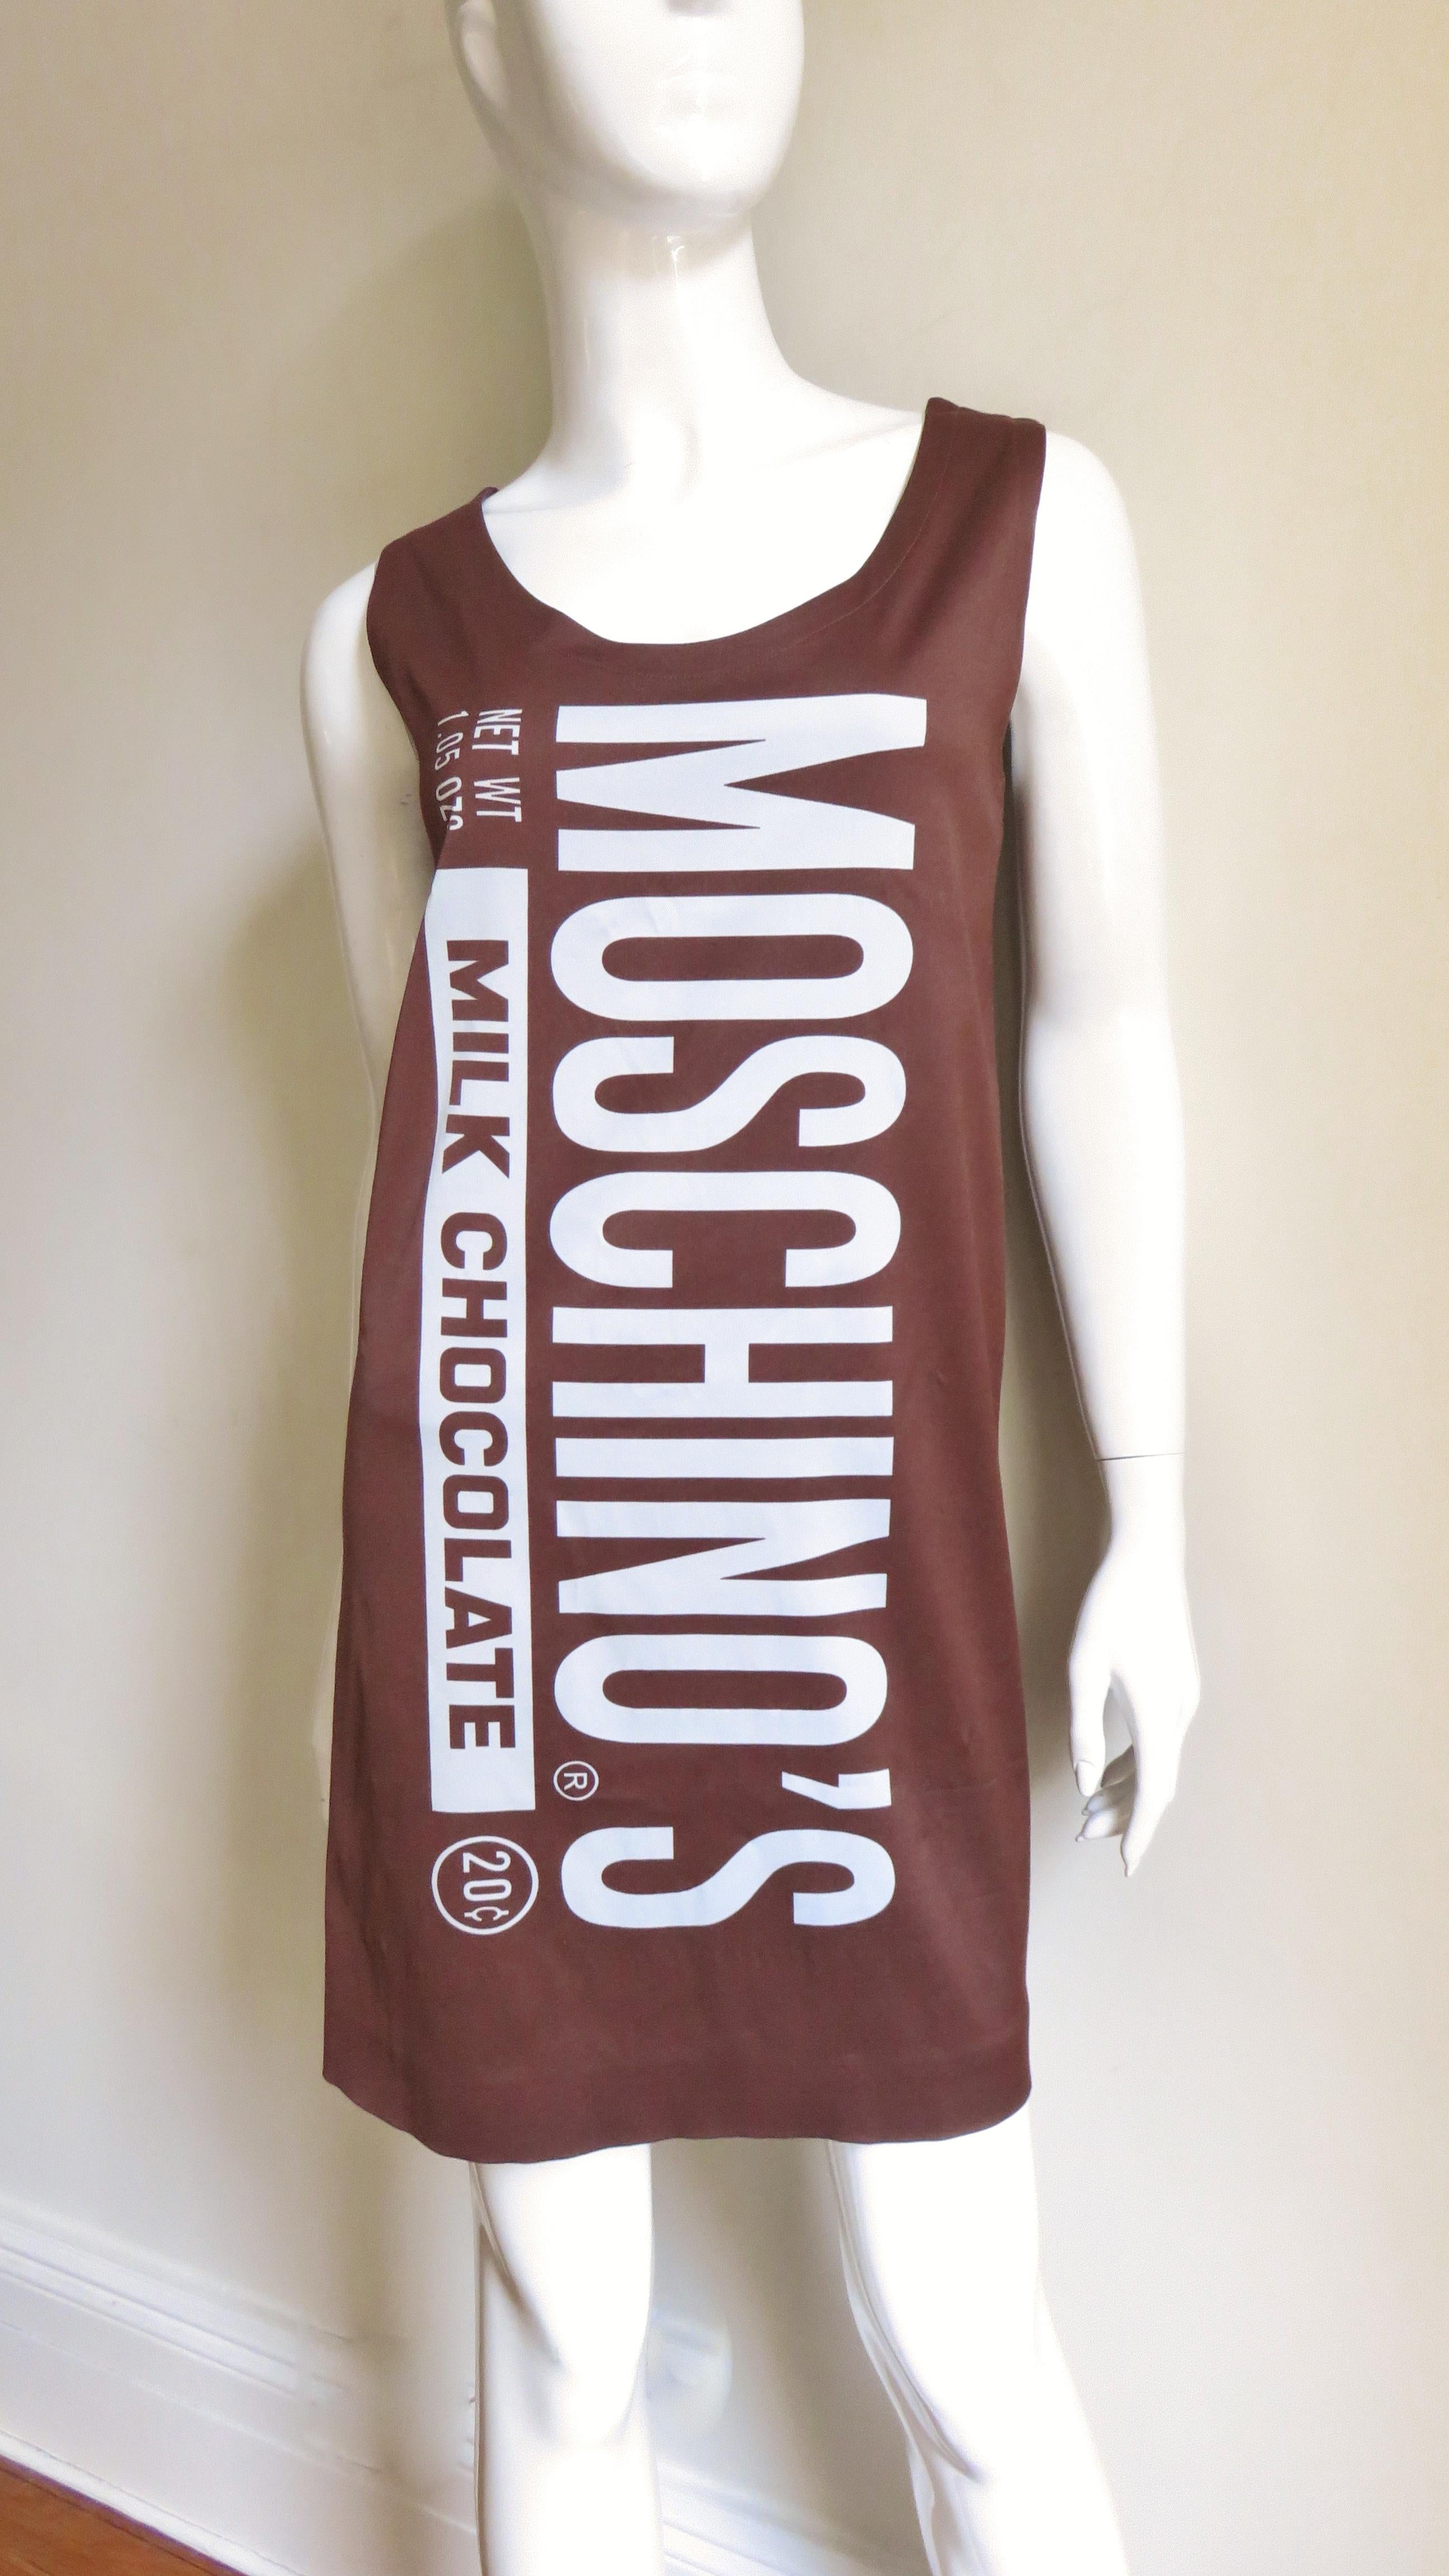 A fabulous chocolate brown jersey dress from the whimsical F/W 2014-2015 Collection of Jeremy Scott for Moschino Couture.  It is a sleeveless shift dress with white lettering mimicking the front of a chocolate bar wrapper and on the back are the